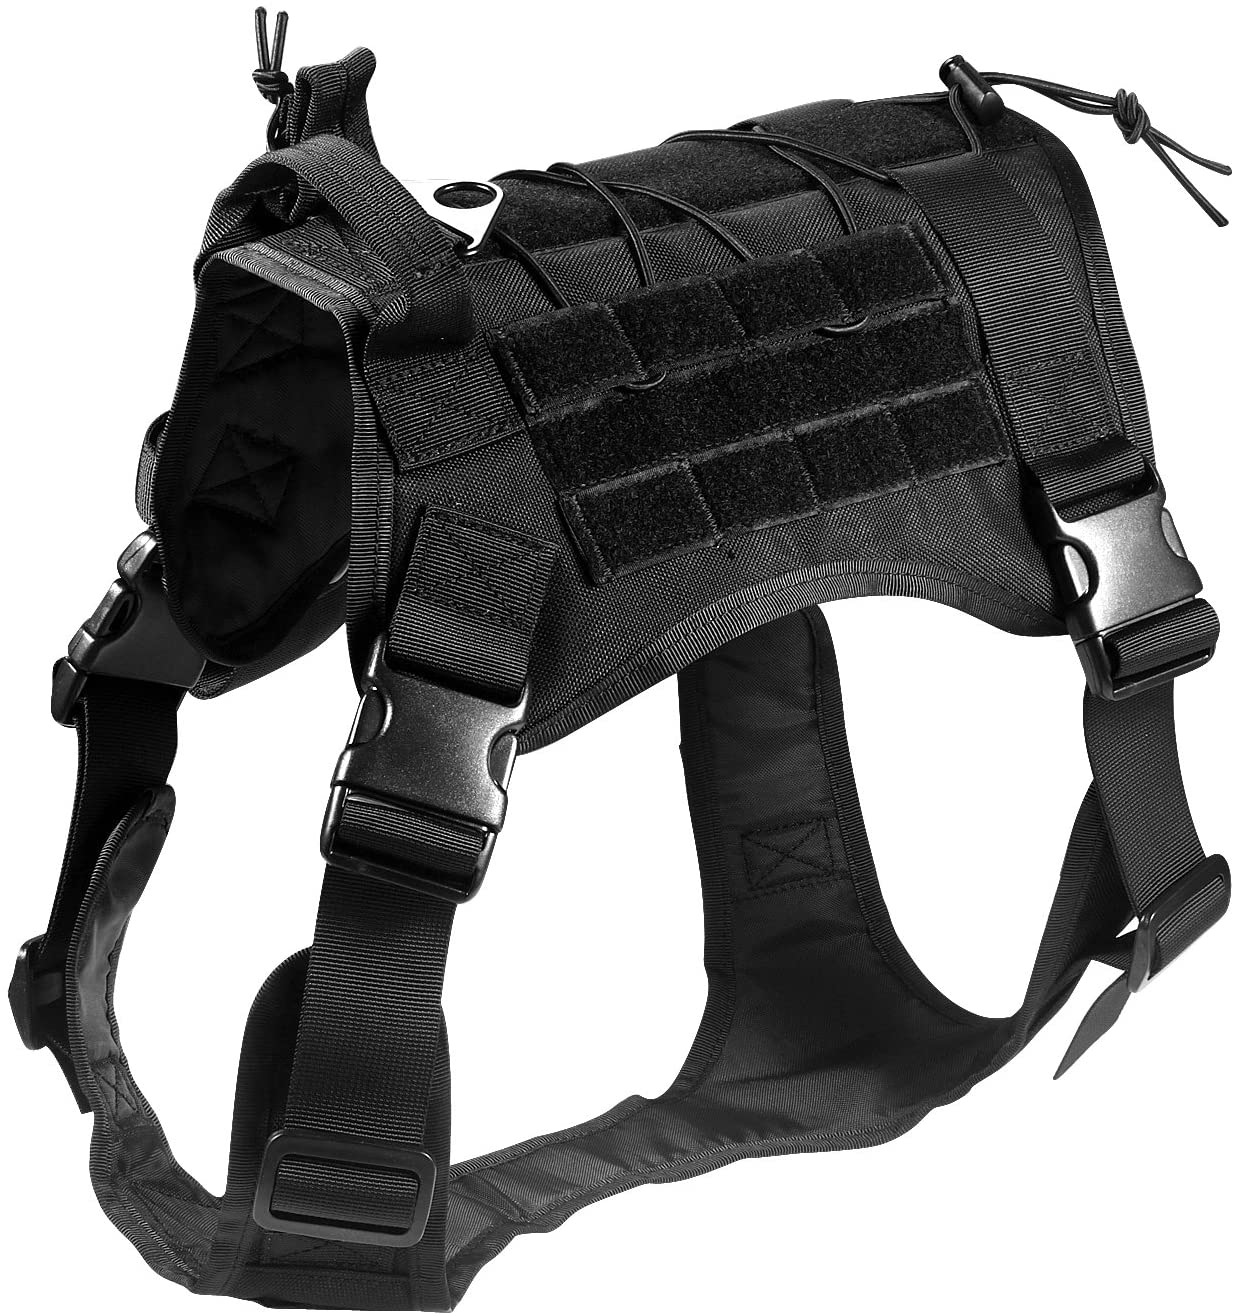 This outdoor tactical dog vest is specially designed as protective gear for working dogs or dogs participating in outdoor activities. It is made of durable nylon material and has multiple attachment points for gear, such as first aid kits, water bottles, and flashlights. The vest provides added protection for the dog and helps to keep them safe during activities such as search and rescue, hiking, or hunting.